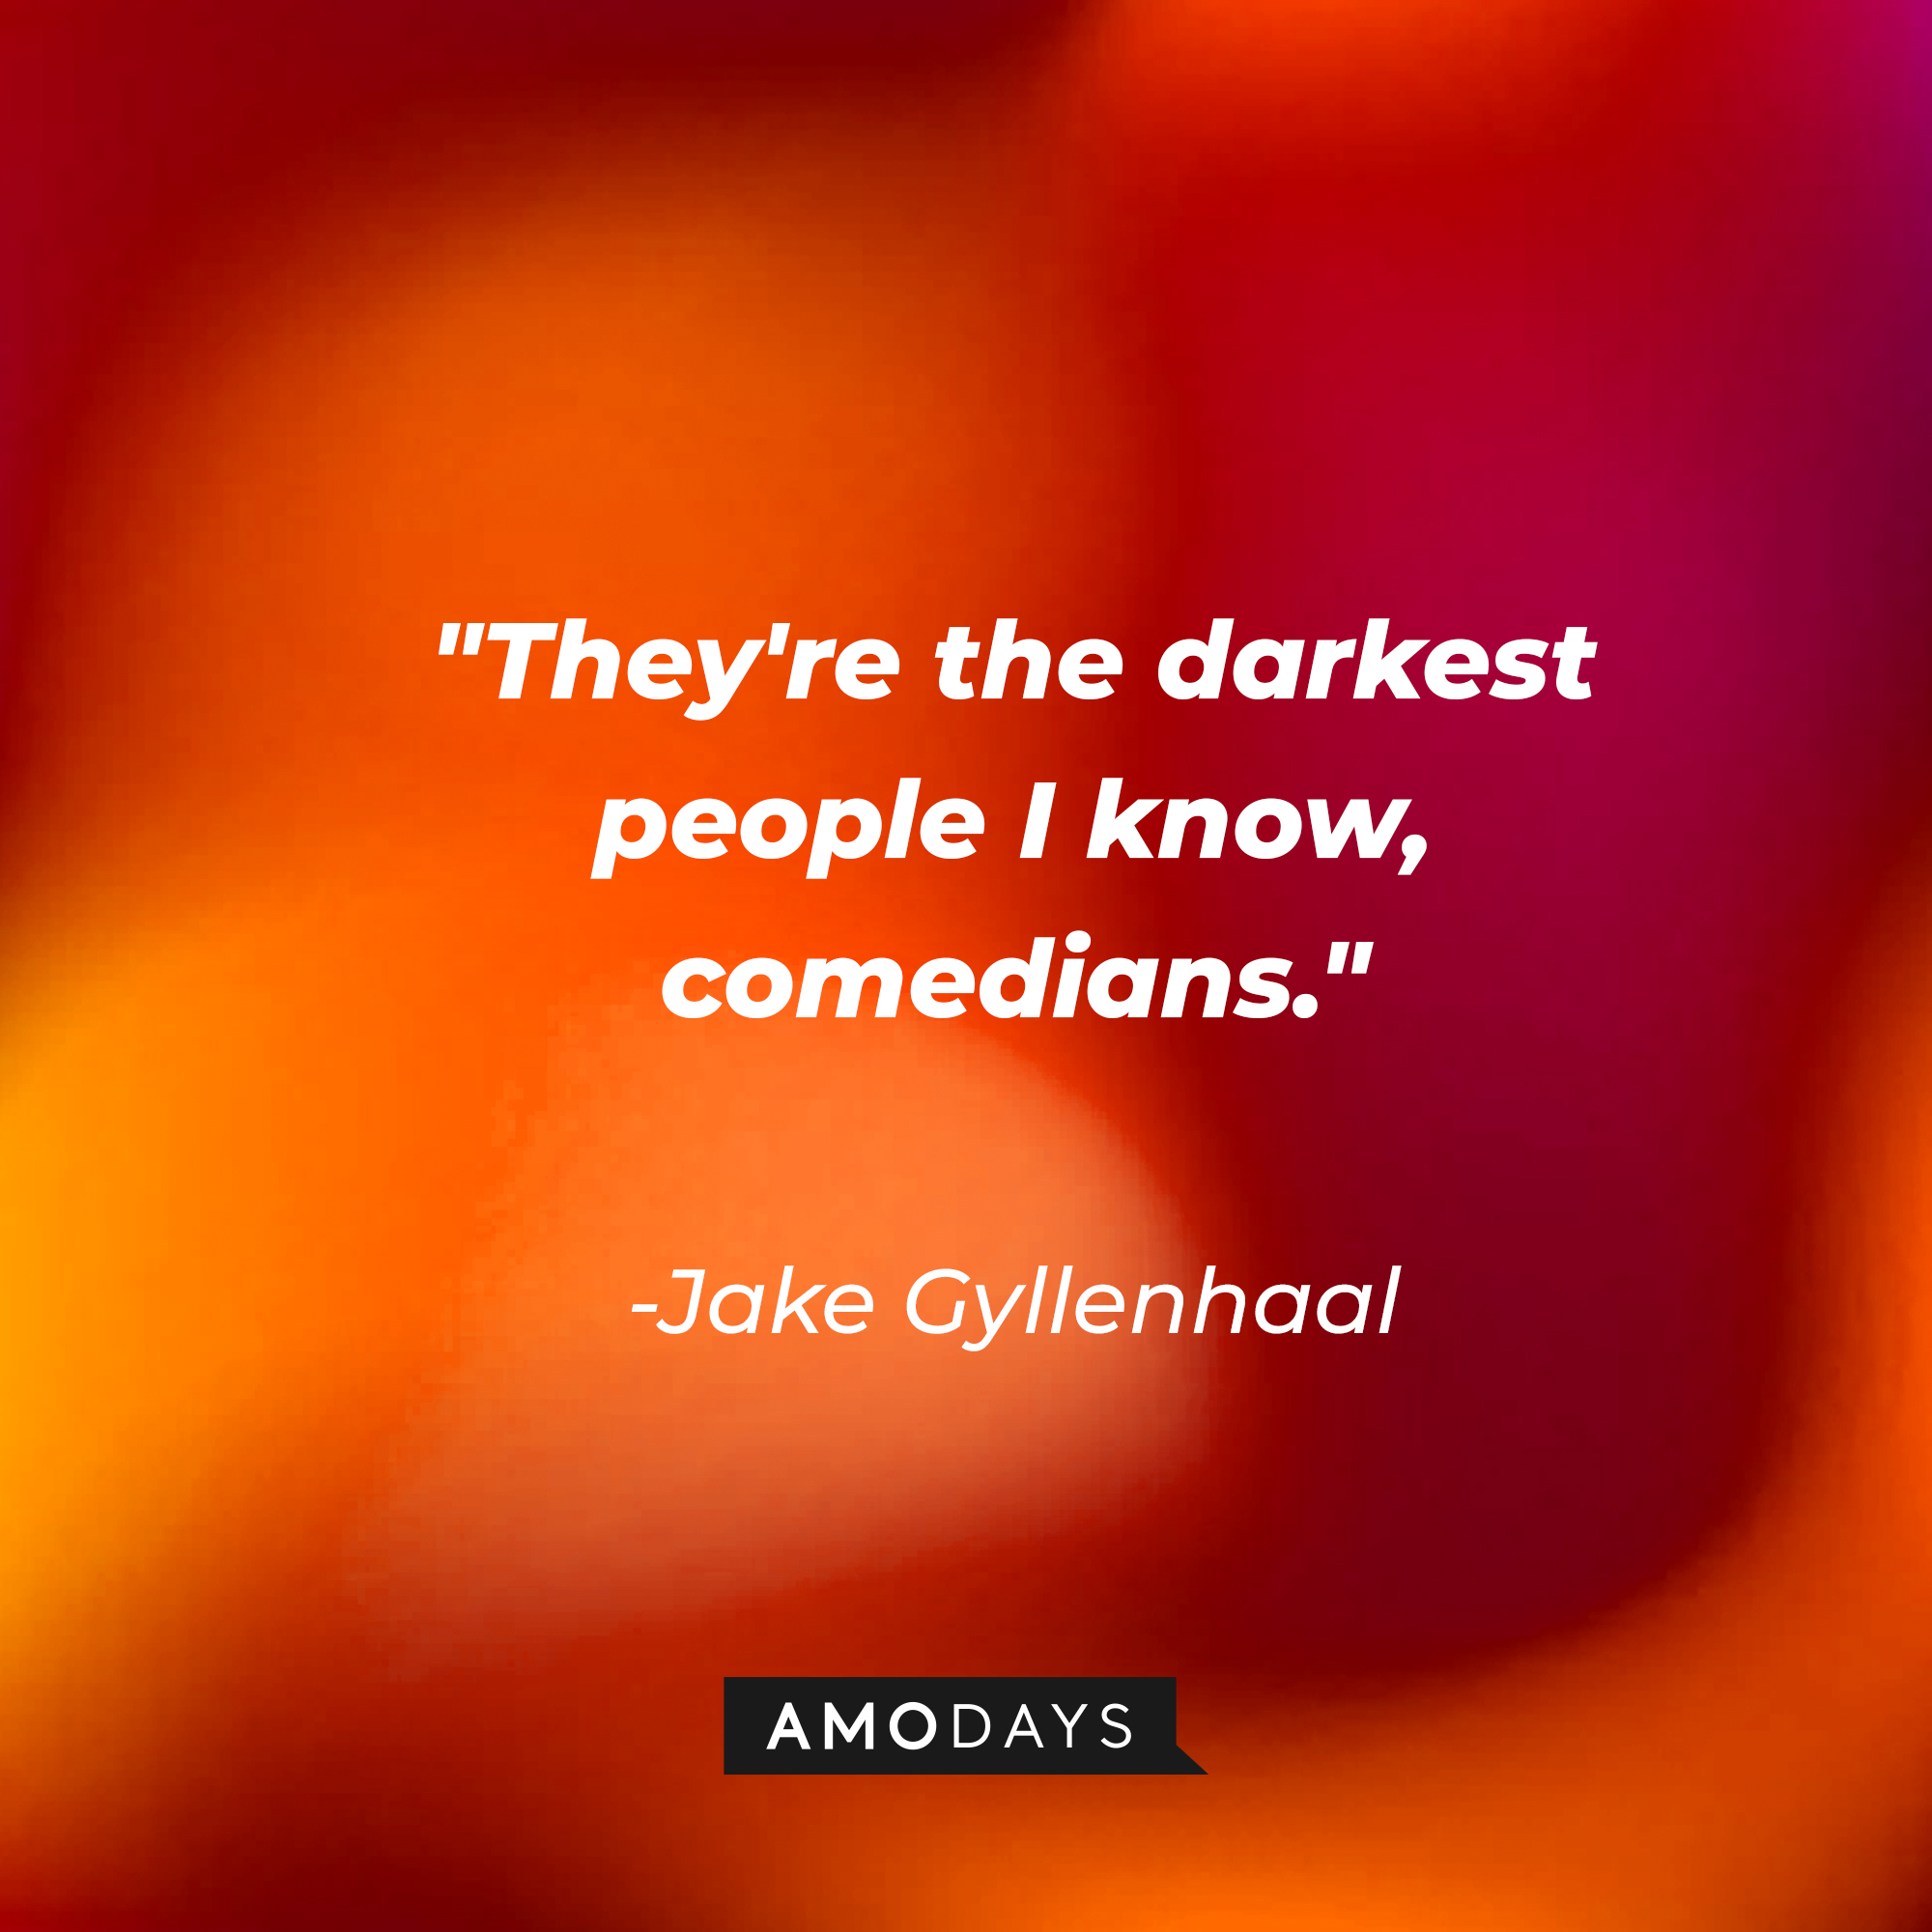 Jake Gyllenhaal's quote: "They're the darkest people I know, comedians." | Source: AmoDays